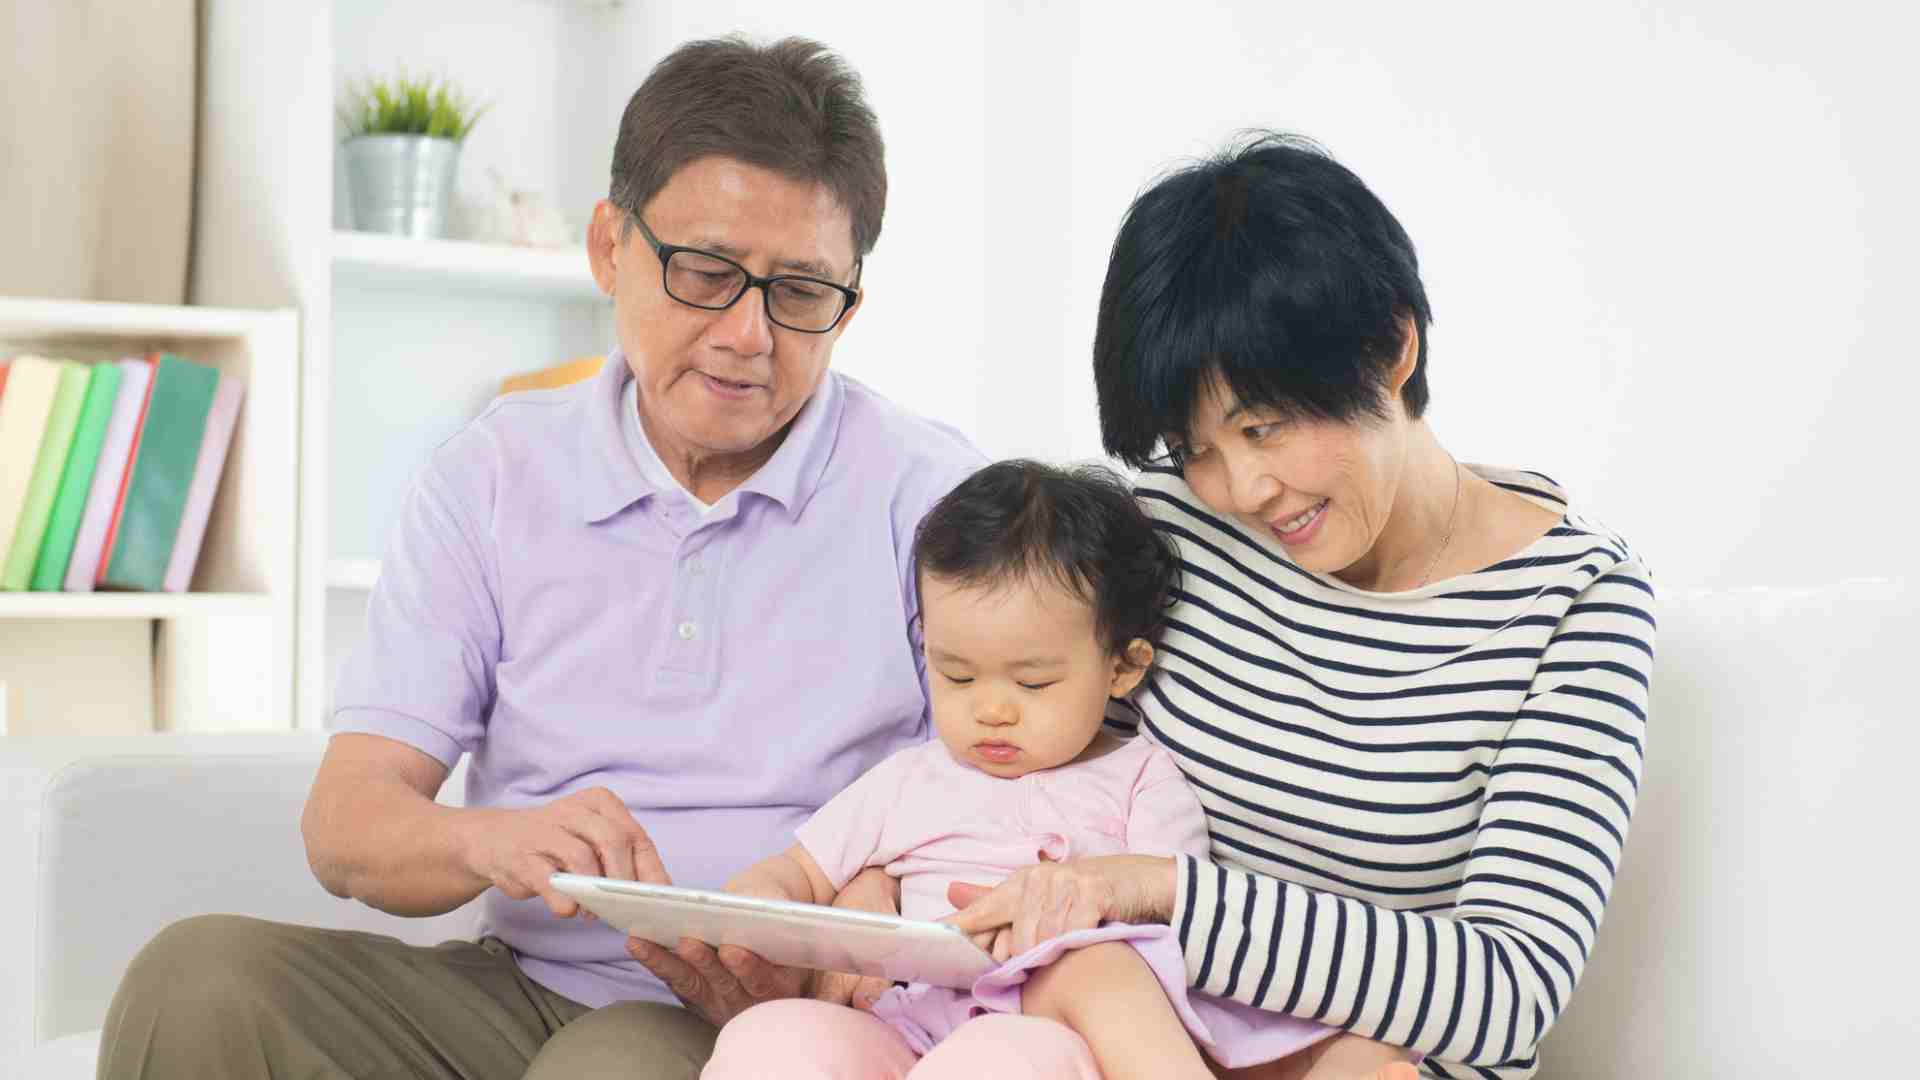 grandparents rights in family court what you need to know